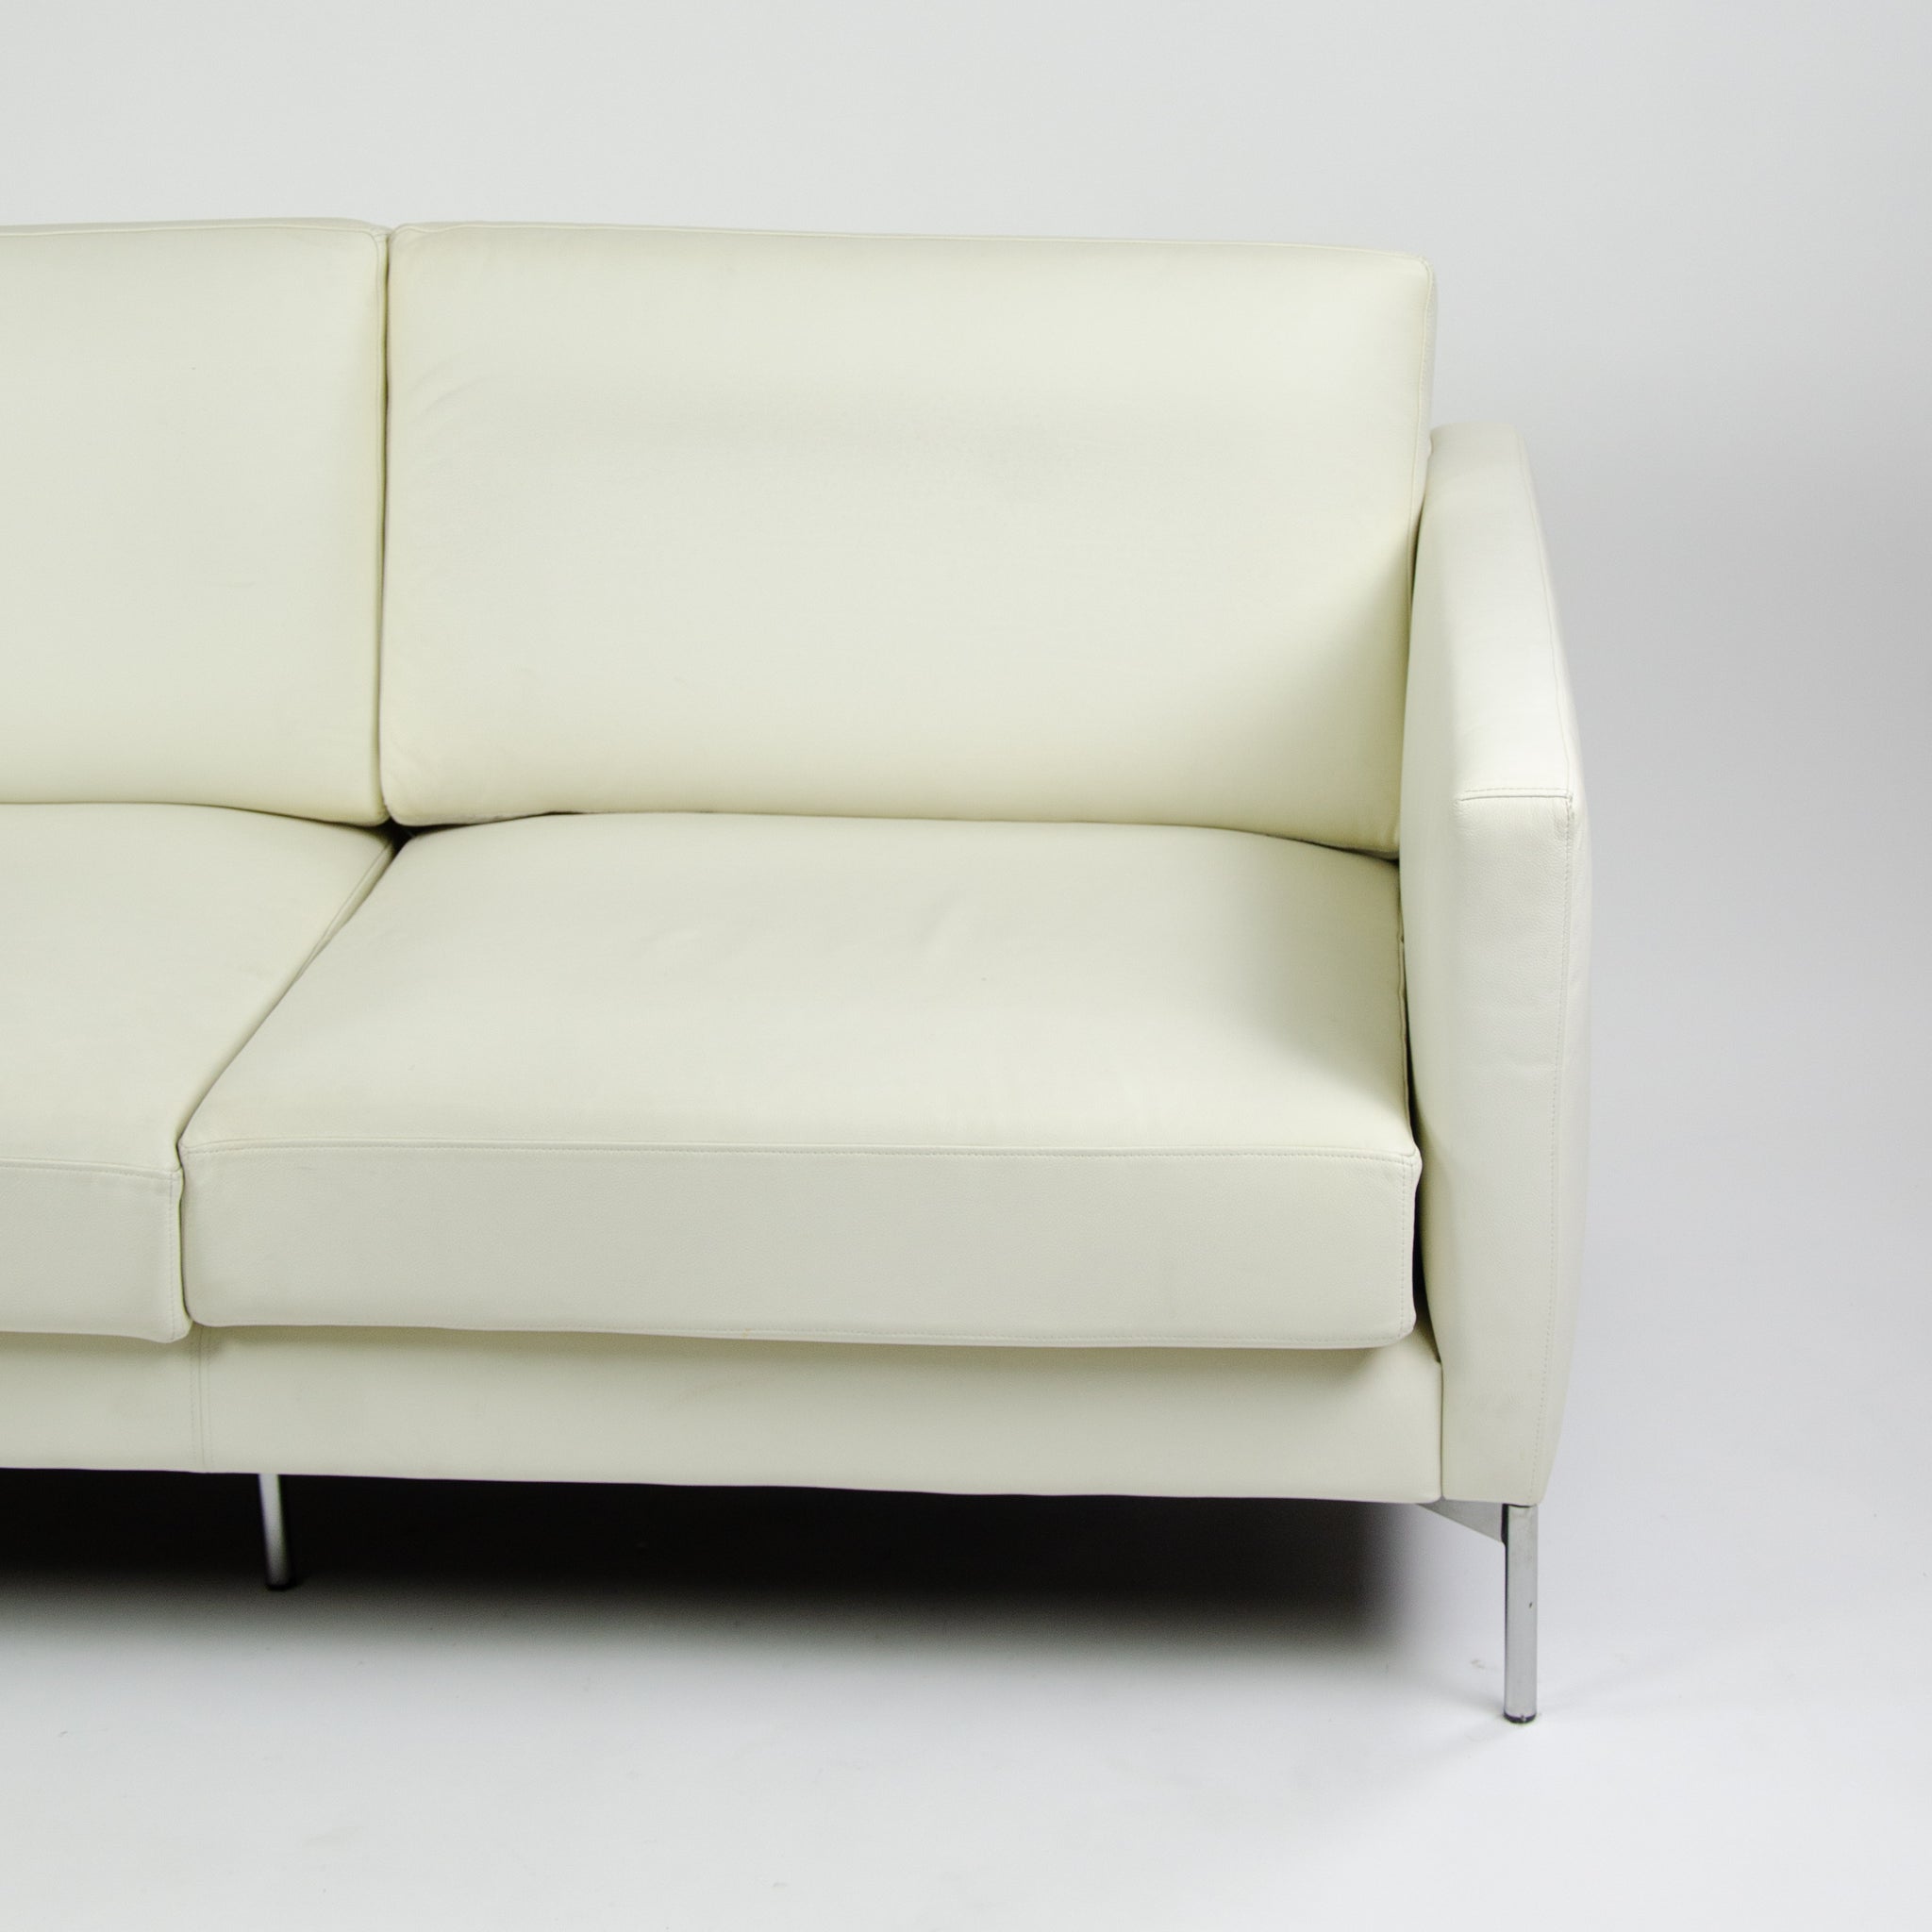 SOLD Knoll International Divina Settee Sofa by Piero Lissoni MINT! Ivory Leather